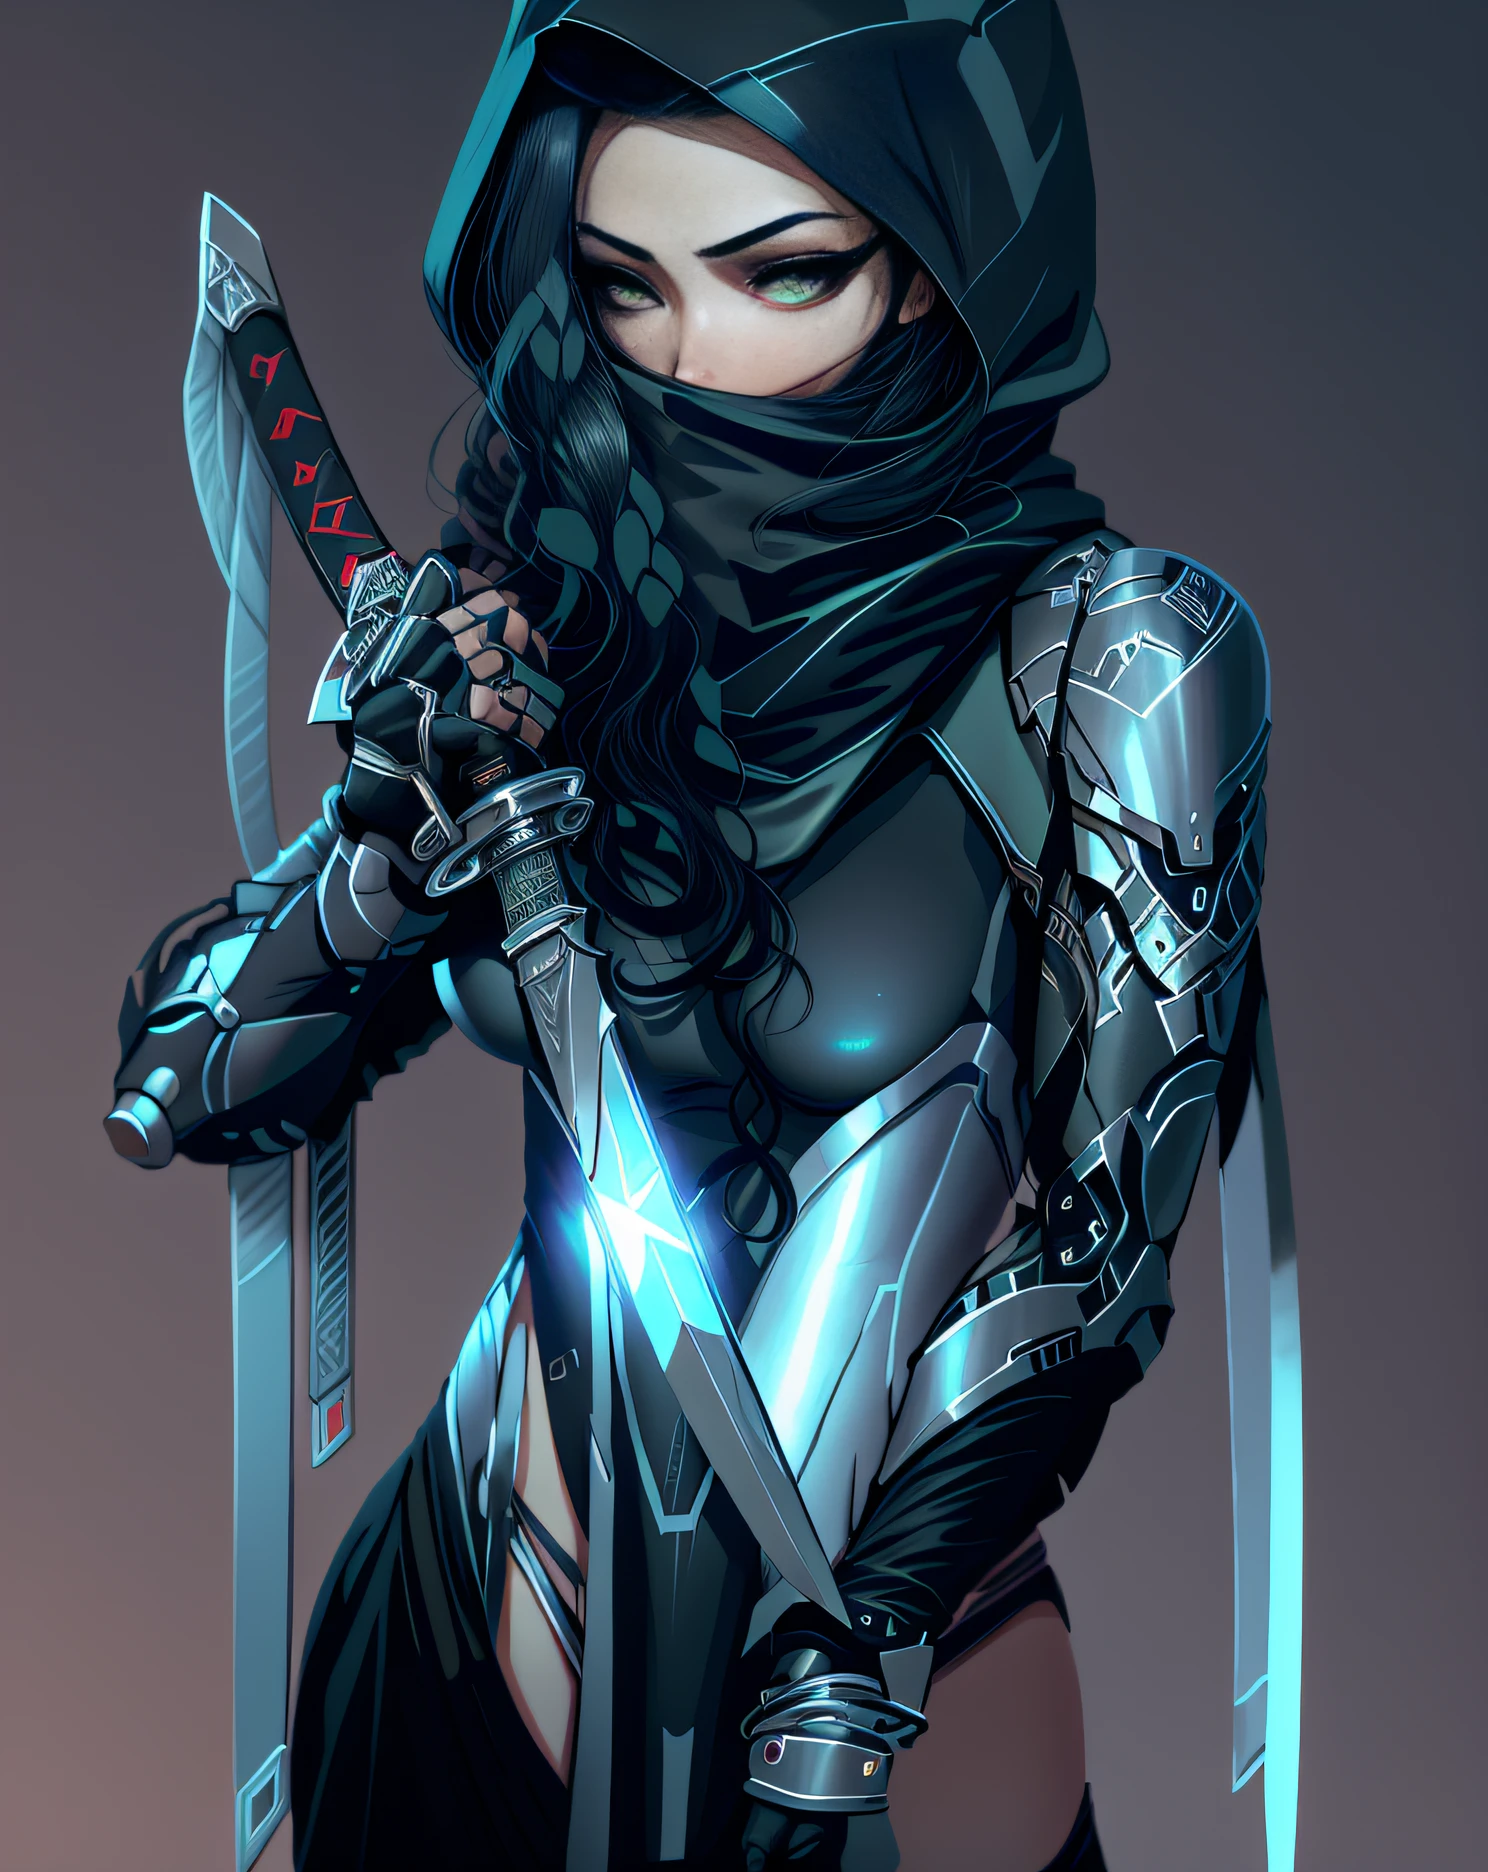 a close up of a person with a sword and a hood, an edgy teen assassin, she is holding a sword, female assassin, holding a sword on her shoulder, afrofuturism anime, beautiful female assassin, katana zero video game character, clothed in stealth armor, holds a black sword, rossdraws | afrofuturism, :: rossdraws, a teen black cyborg